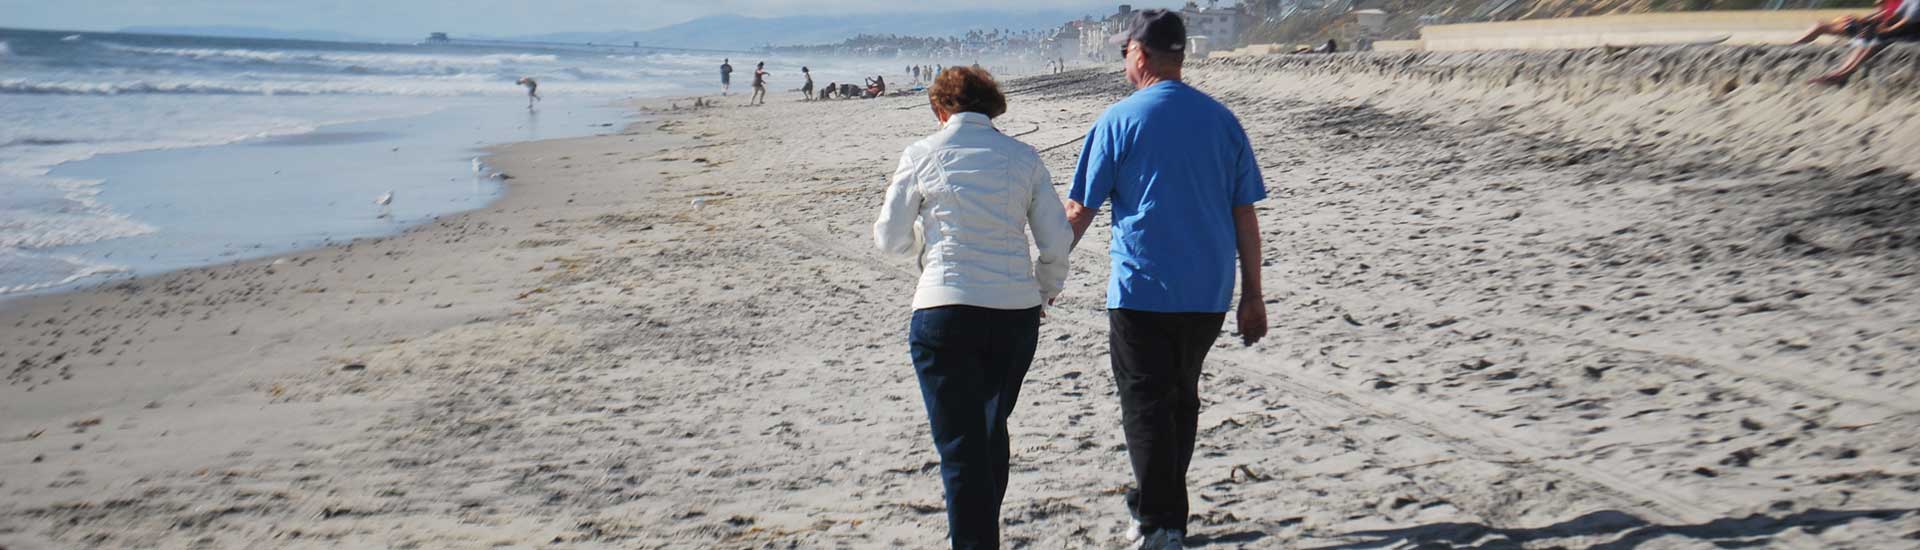 Senior couple holding hands walking on a beach